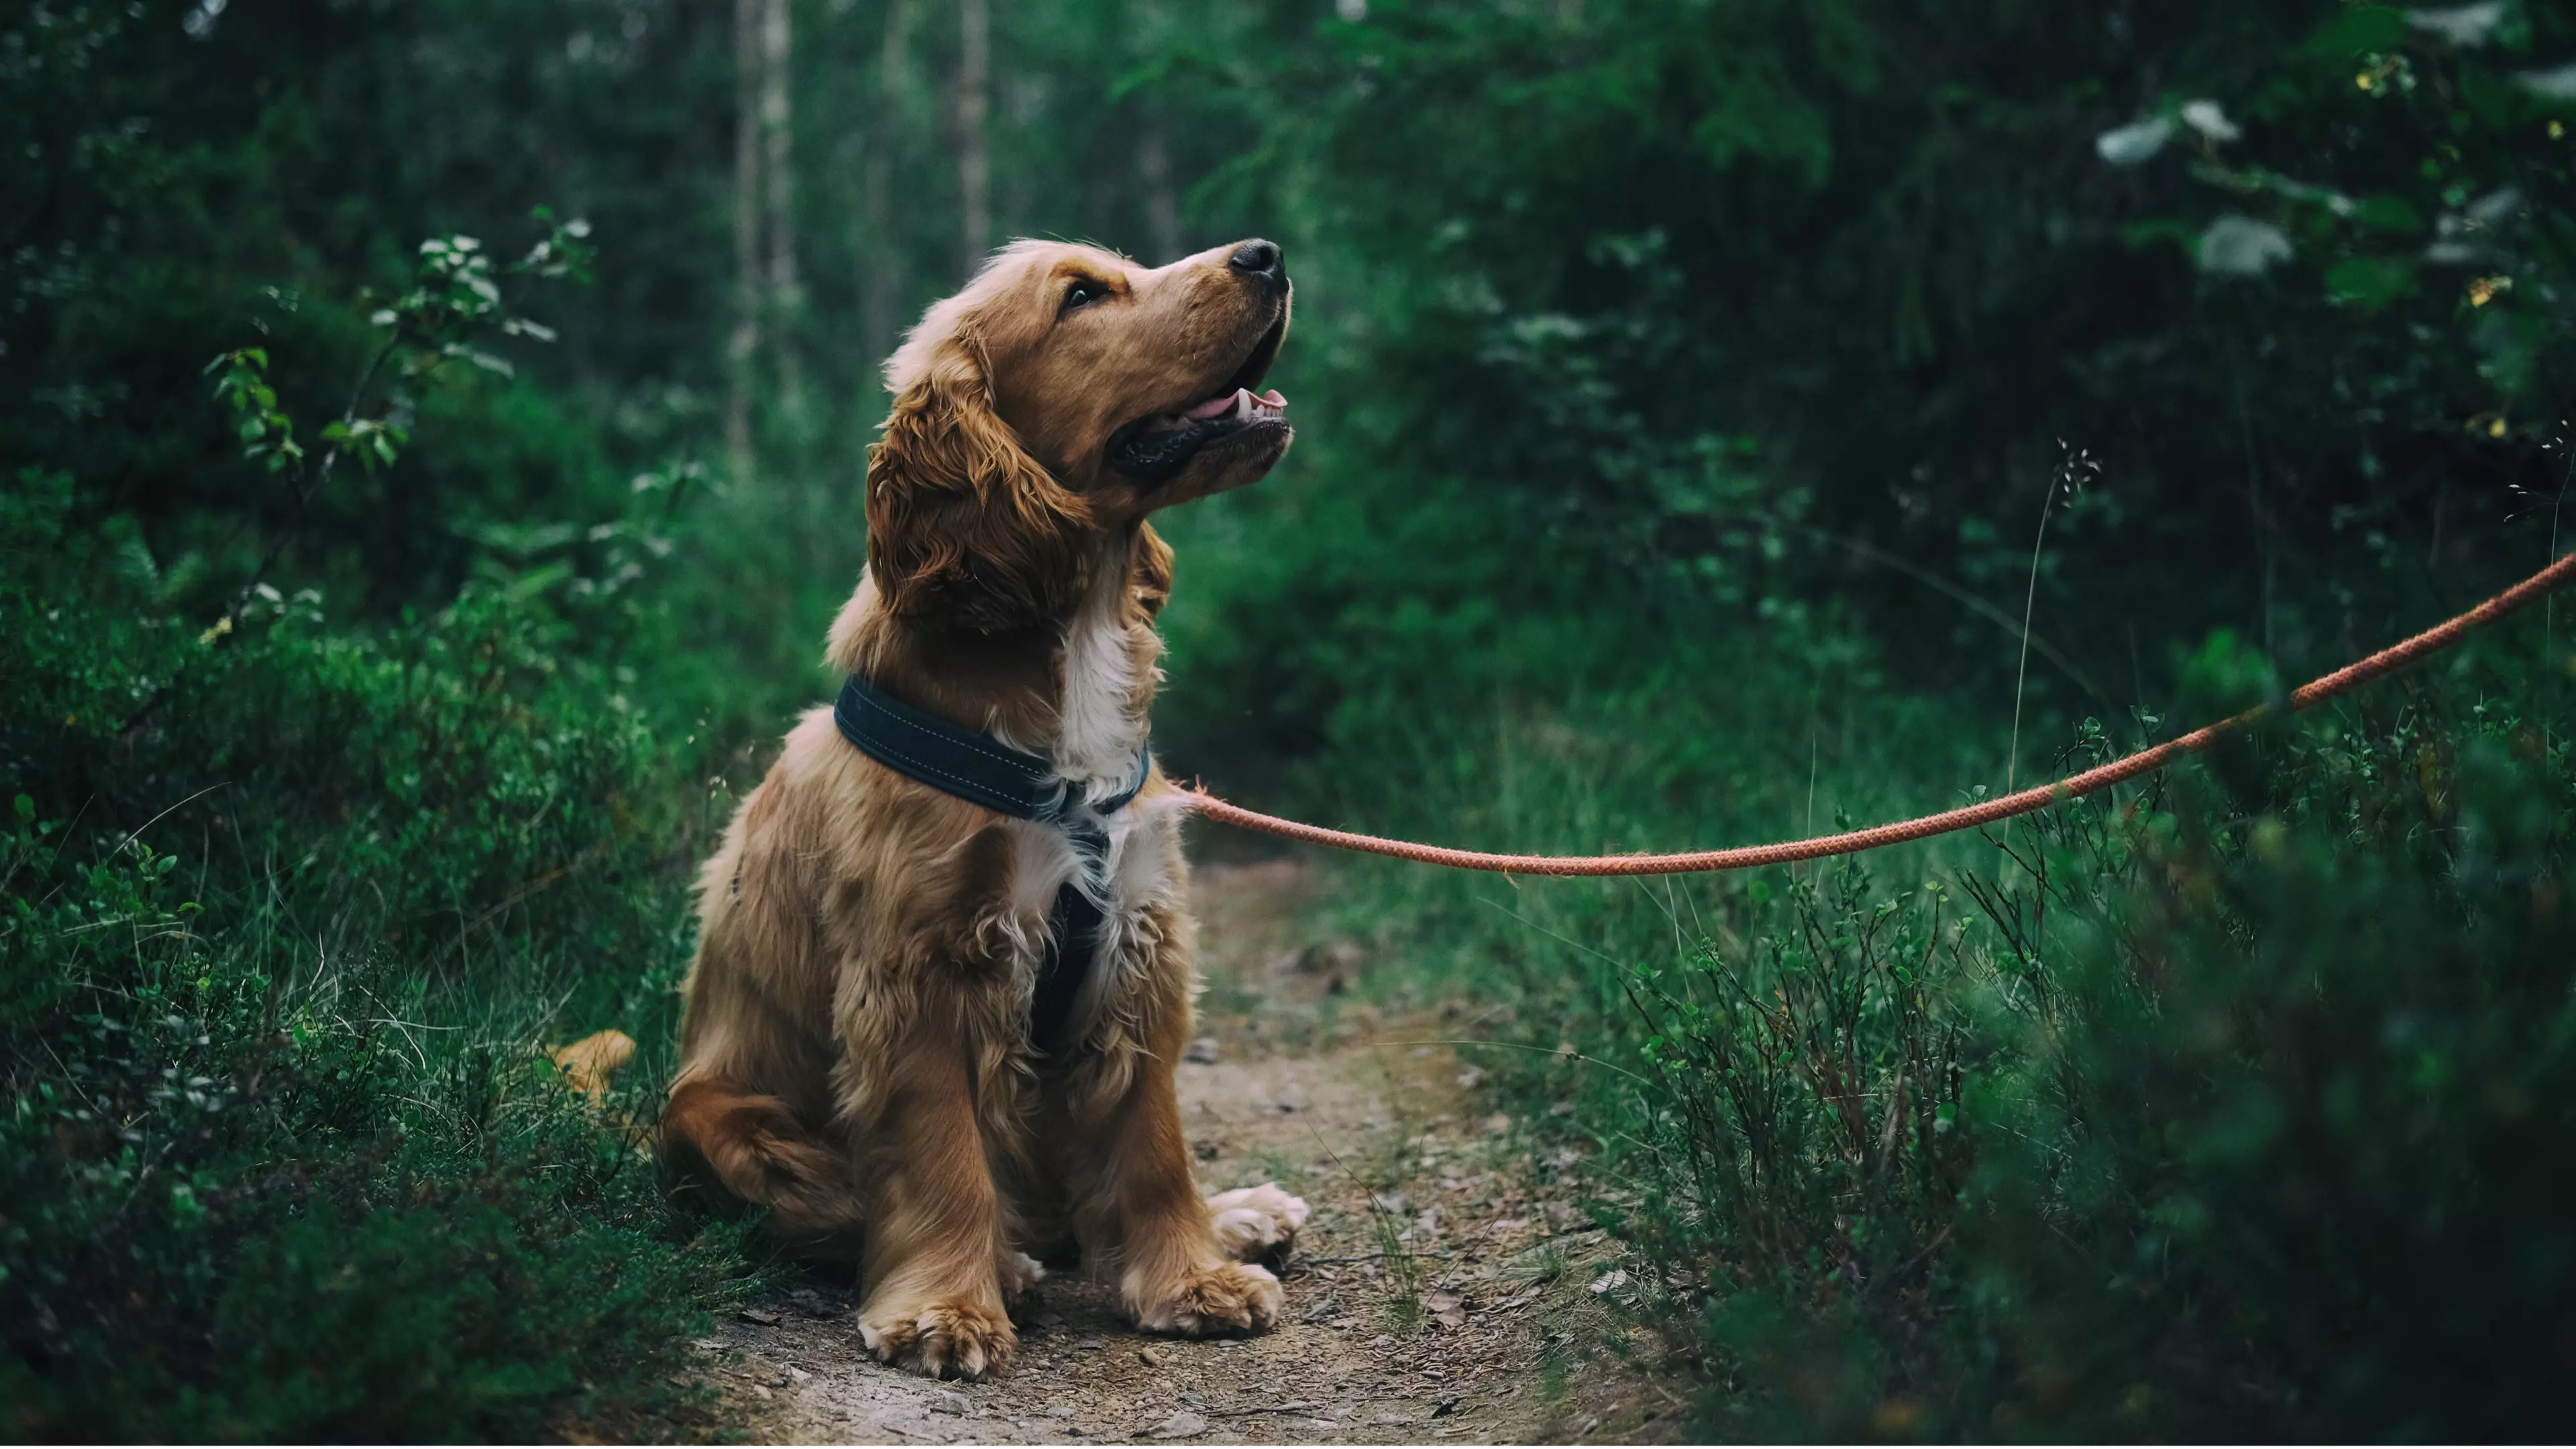 Less Than Half Of Dogs Get Walked Daily, Study Finds